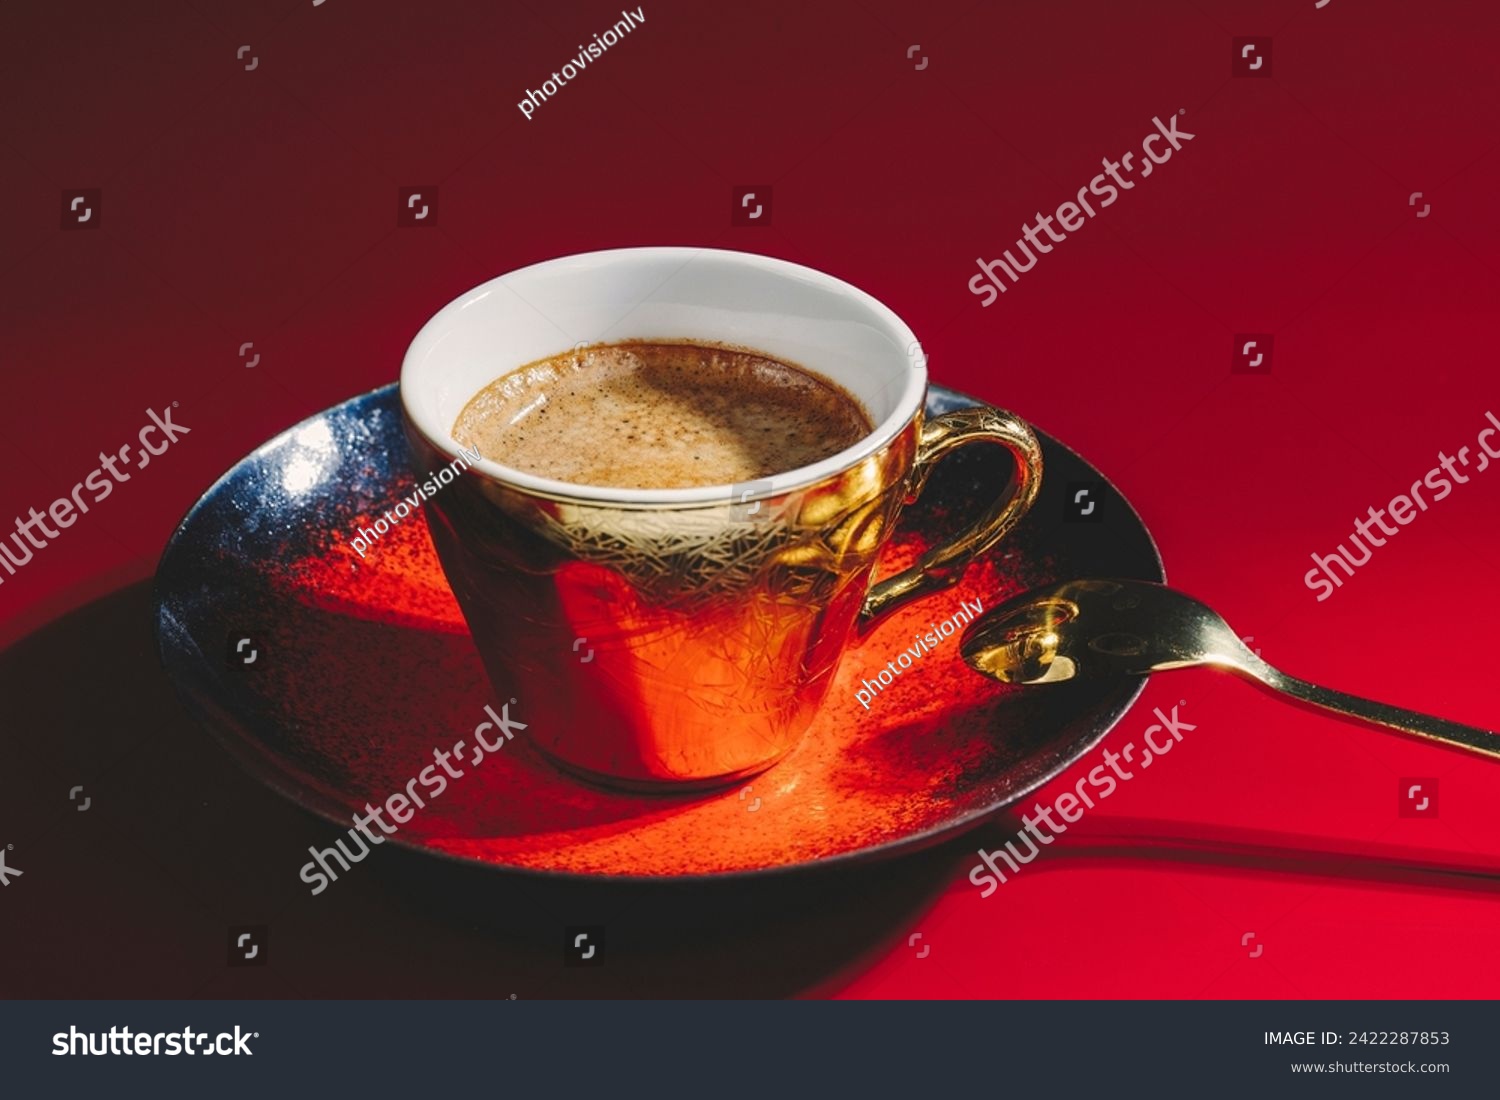 Coffee in a golden cup on a red background: A vibrant fusion, where the warm hues of the beverage harmonize with the bold red backdrop. #2422287853